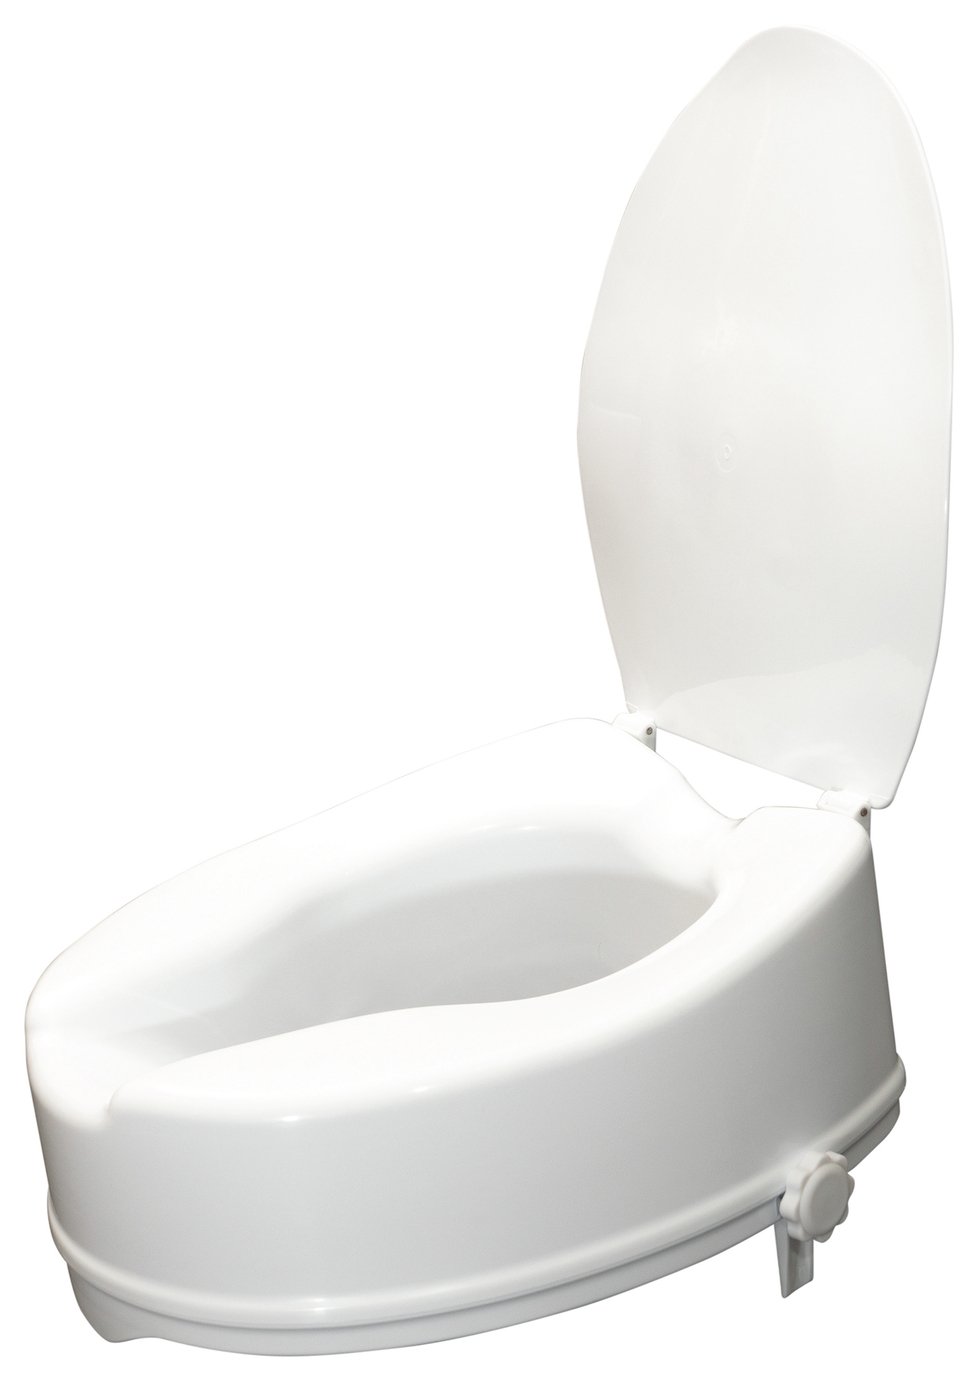 Aidapt 6 Inches Raised Toilet Seat with Lid